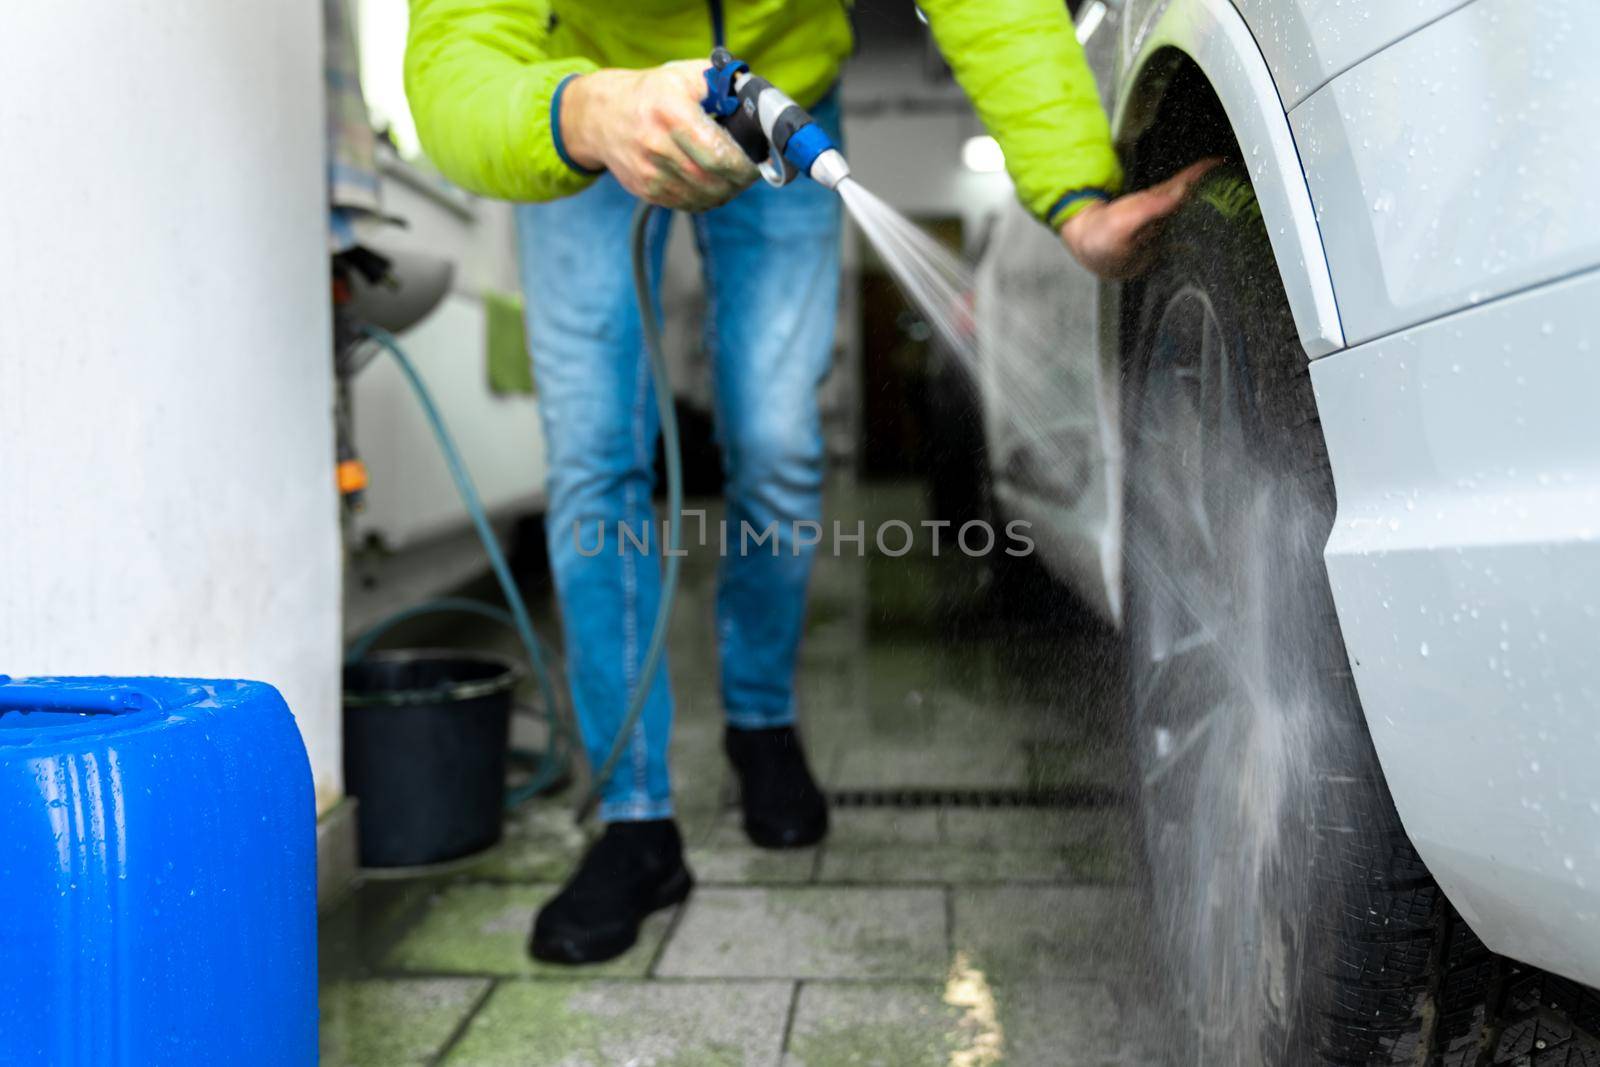 manually wash car wheels using pressure hoses with water.